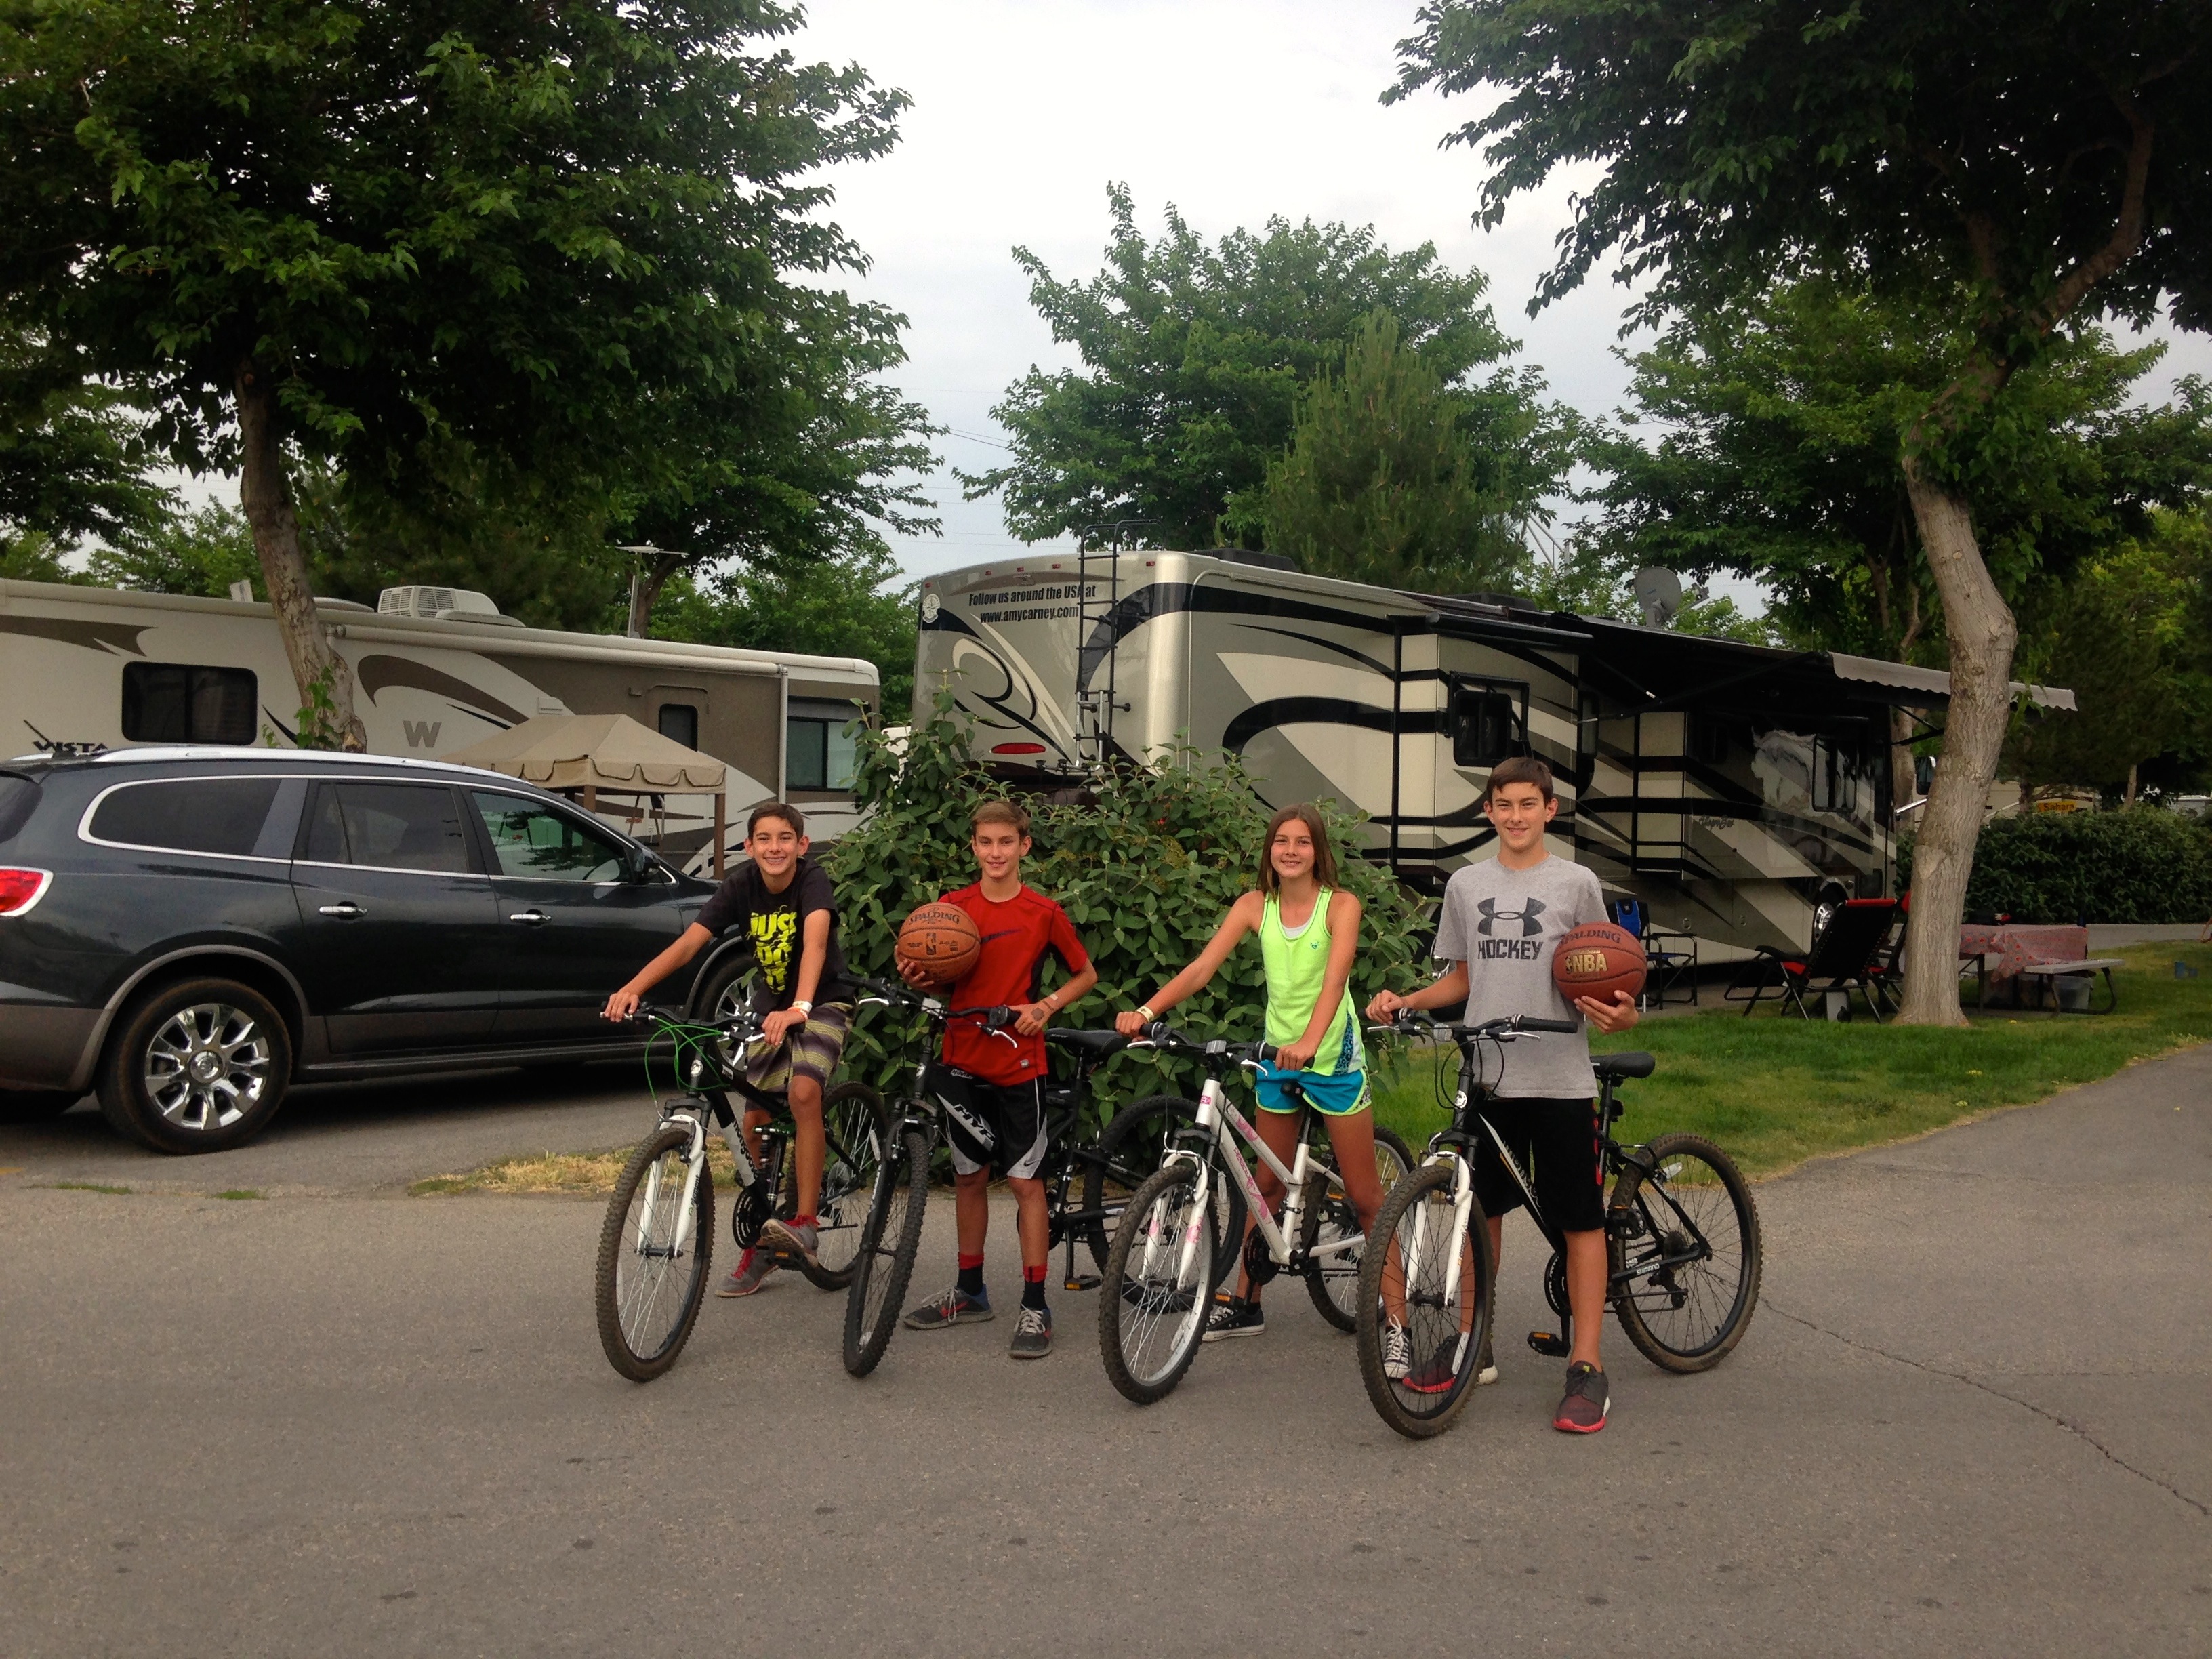 the carney family at a KOA campground in Salt Lake City